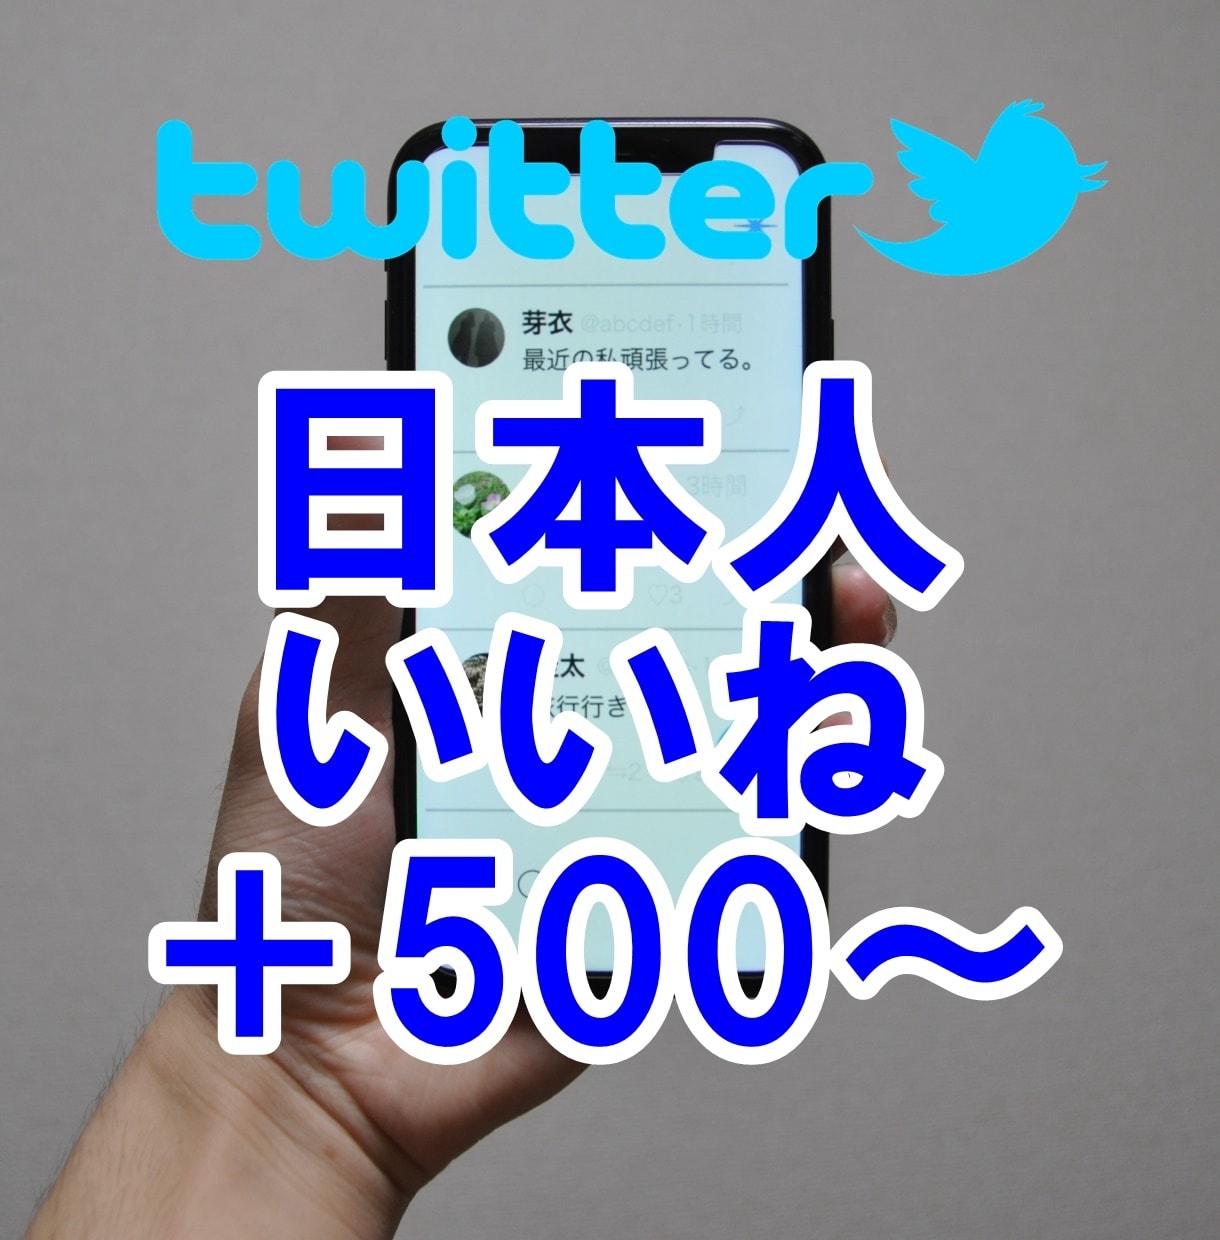 💬Coconara｜Twitter Japanese likes +500 times - Increase Masayan @ Helping you work and live safely and securely...